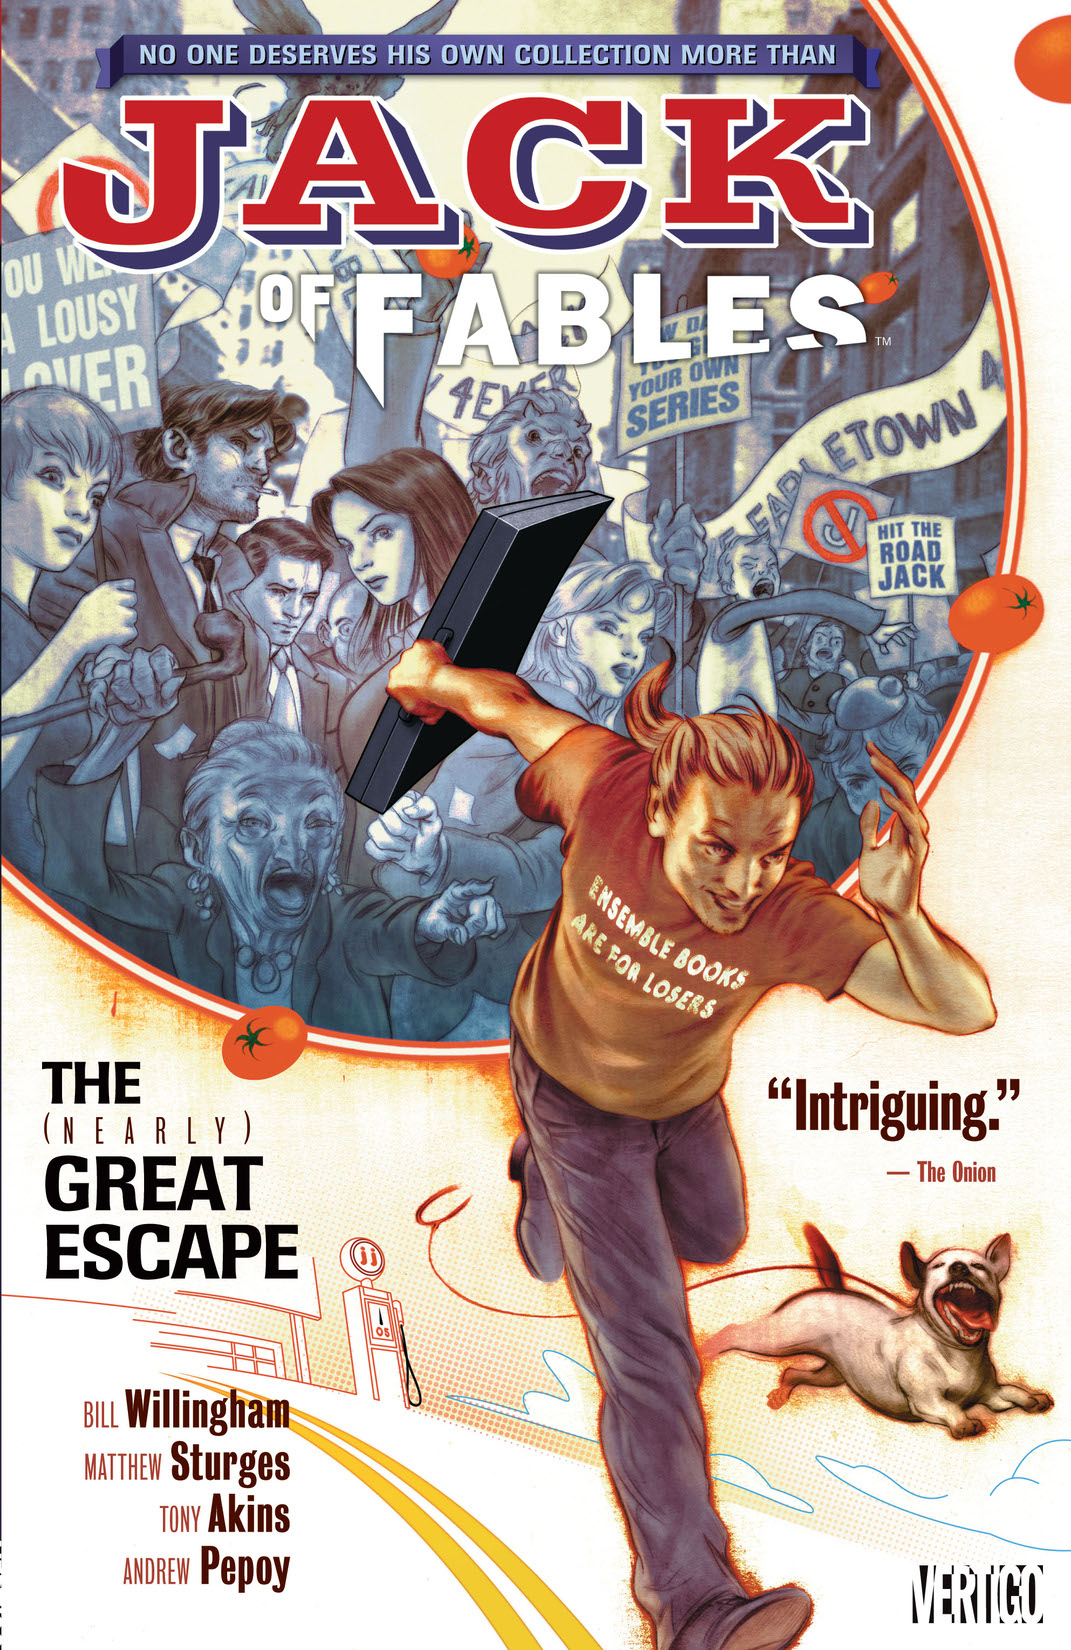 Jack of Fables Vol. 1: The Nearly Great Escape preview images